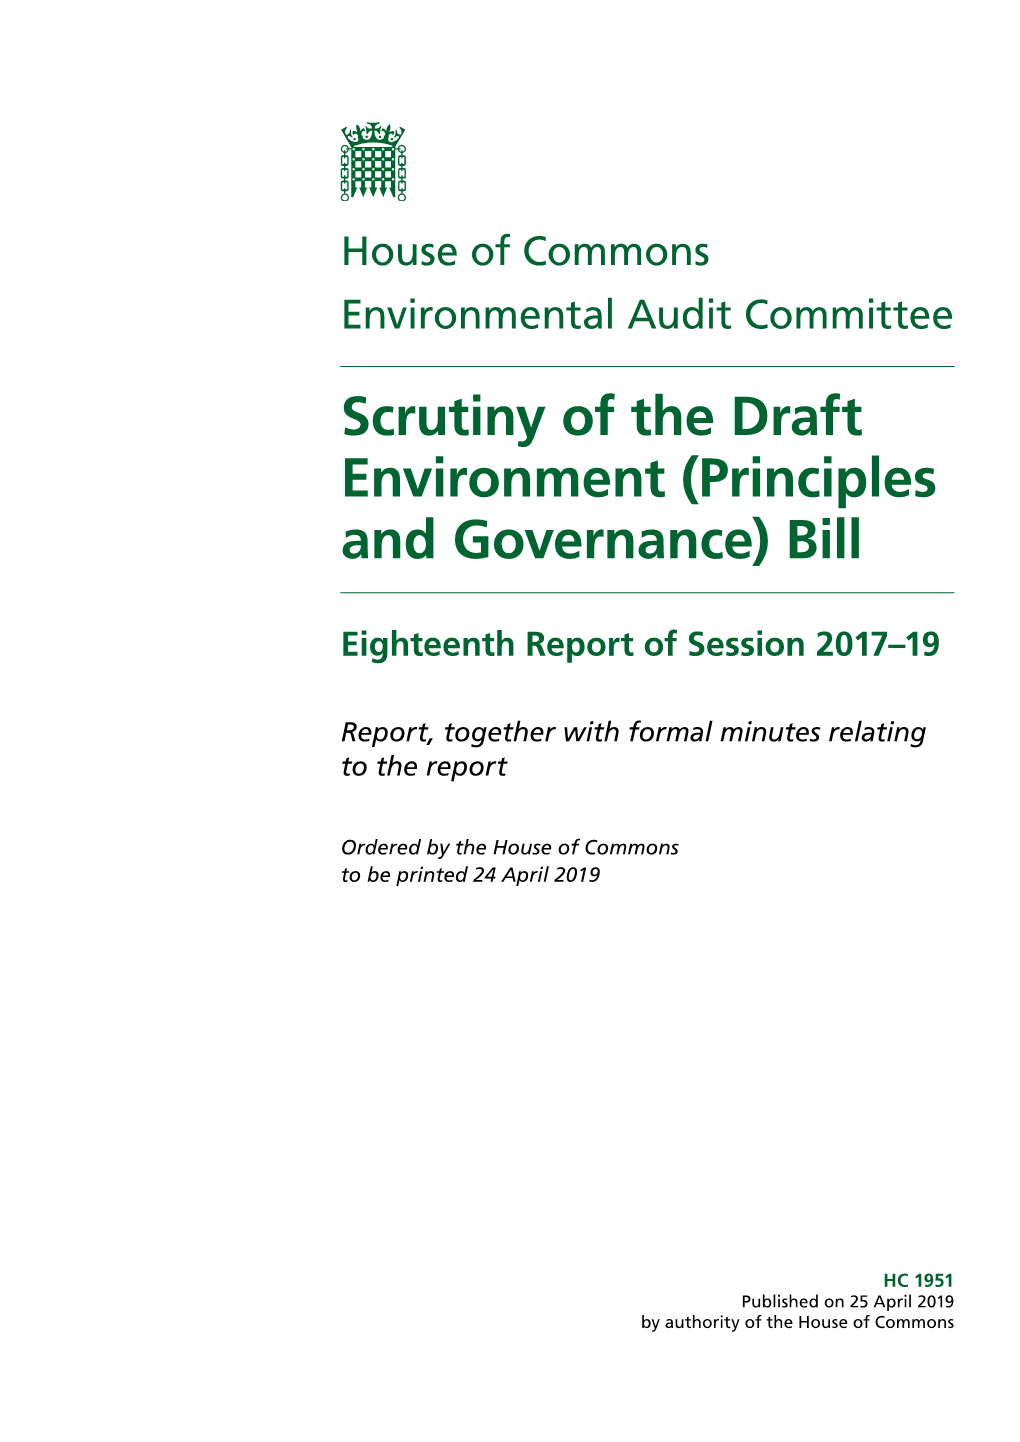 Scrutiny of the Draft Environment (Principles and Governance) Bill